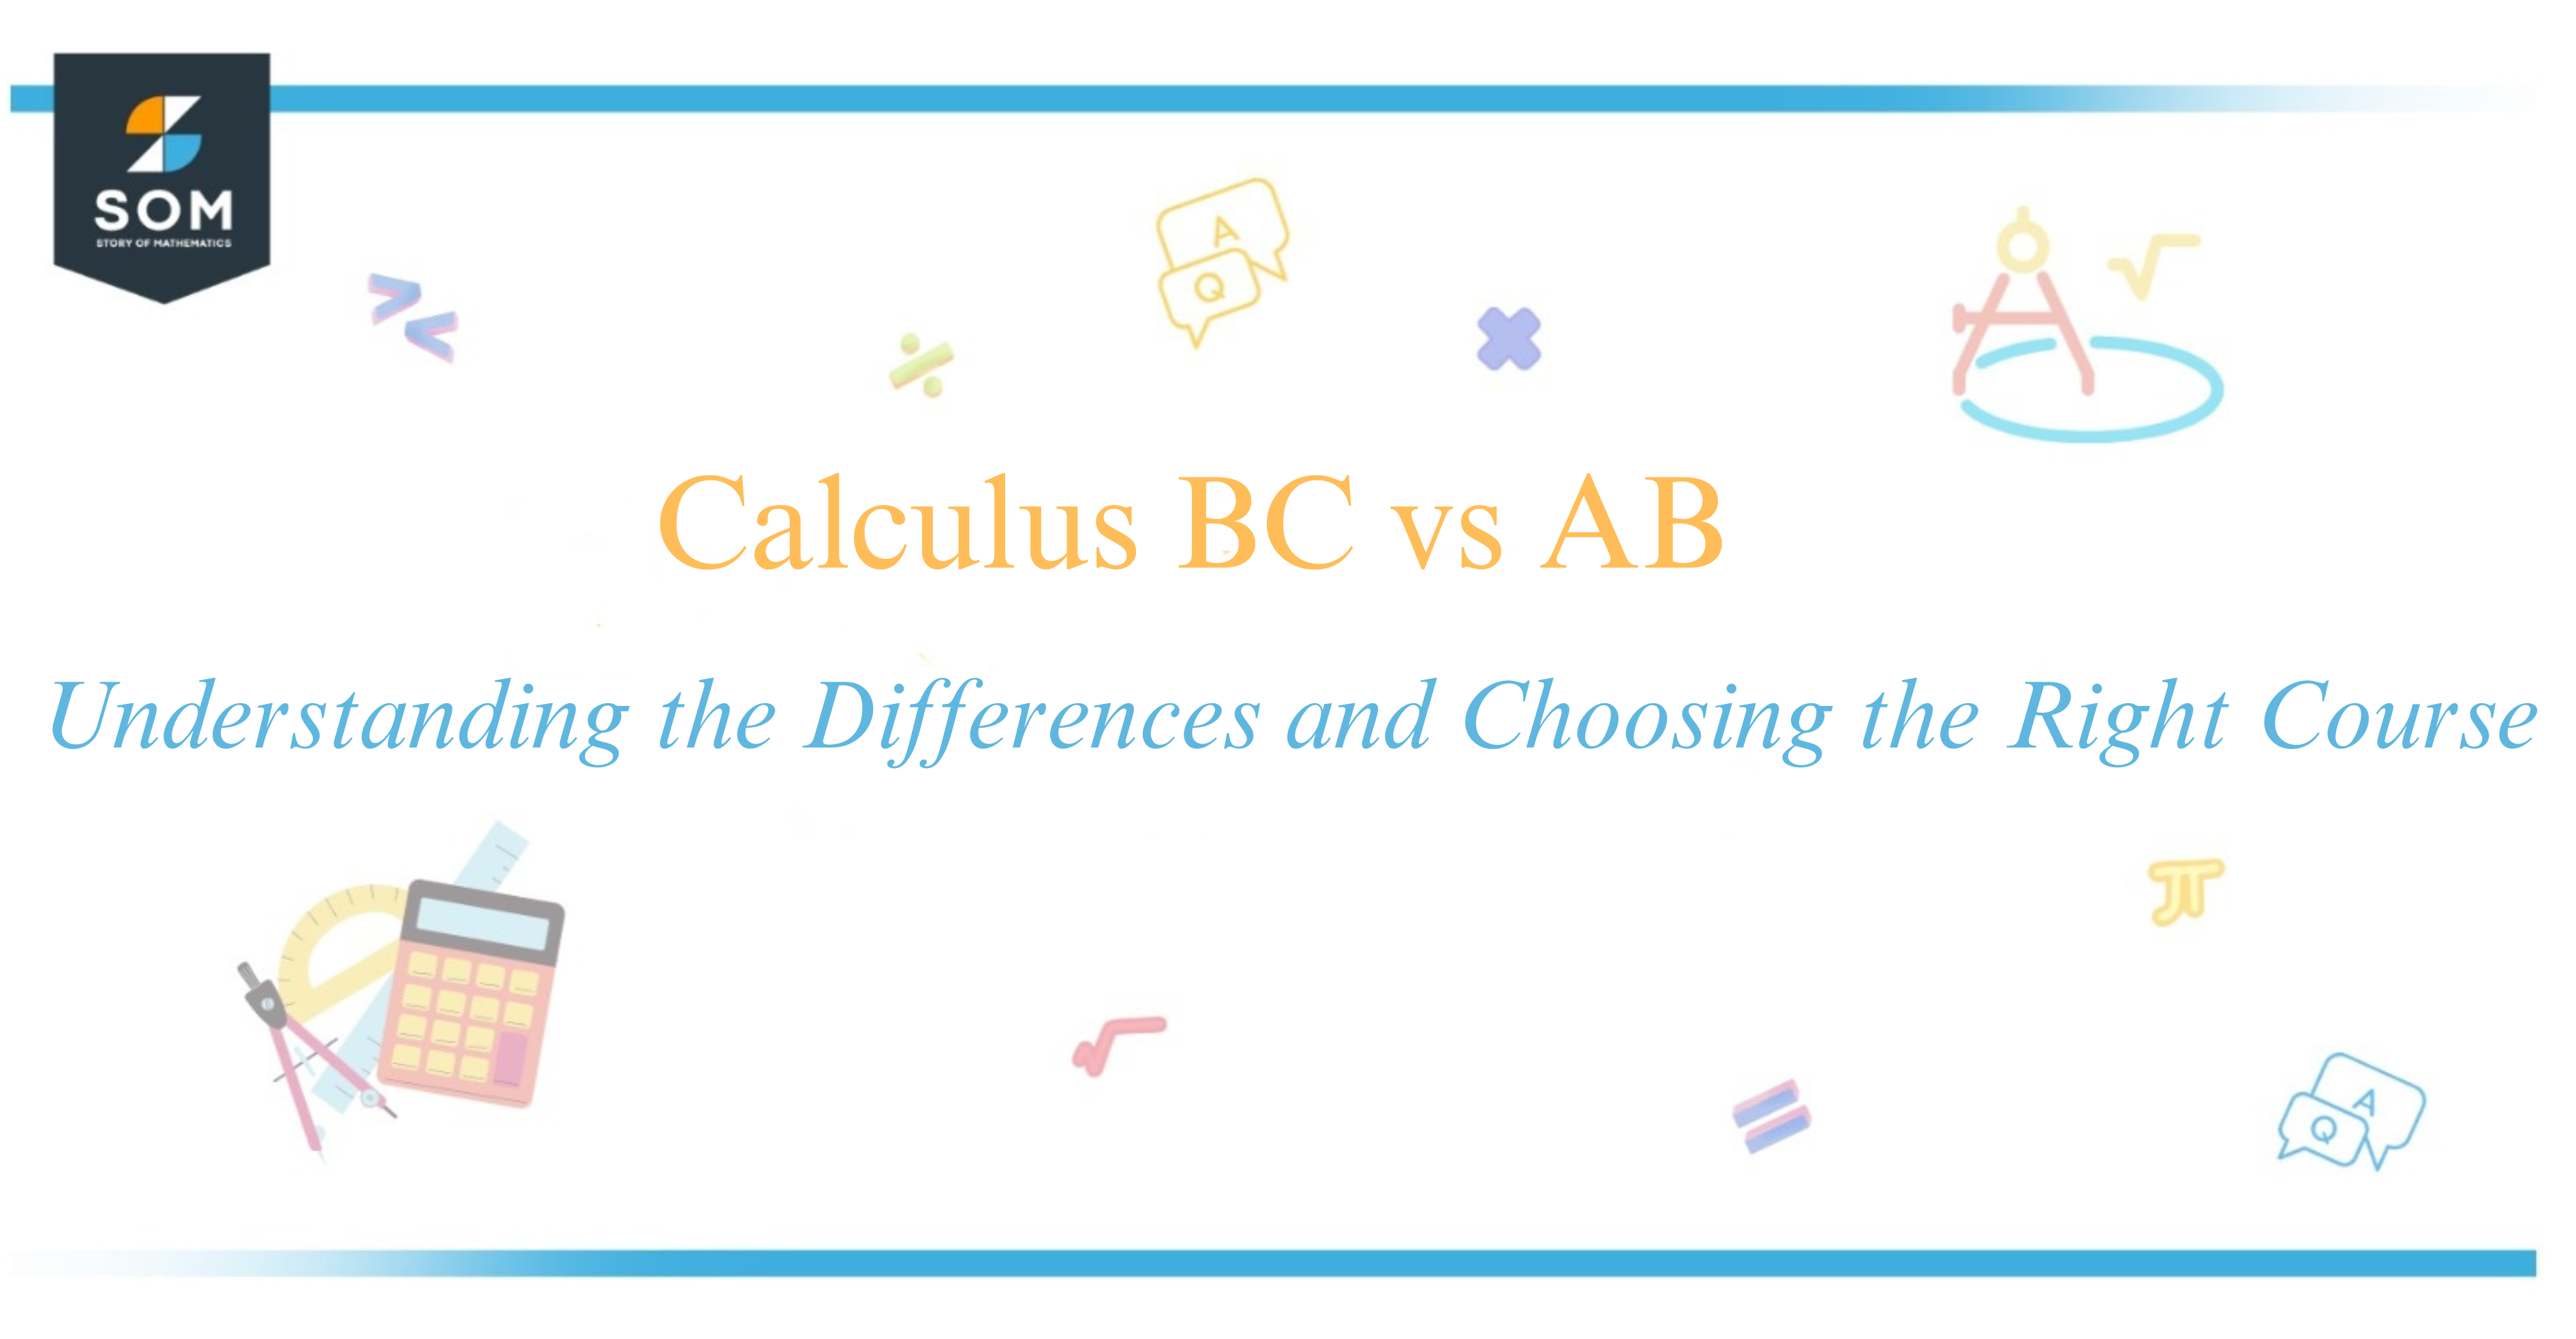 Calculus BC vs AB Understanding the Differences and Choosing the Right Course